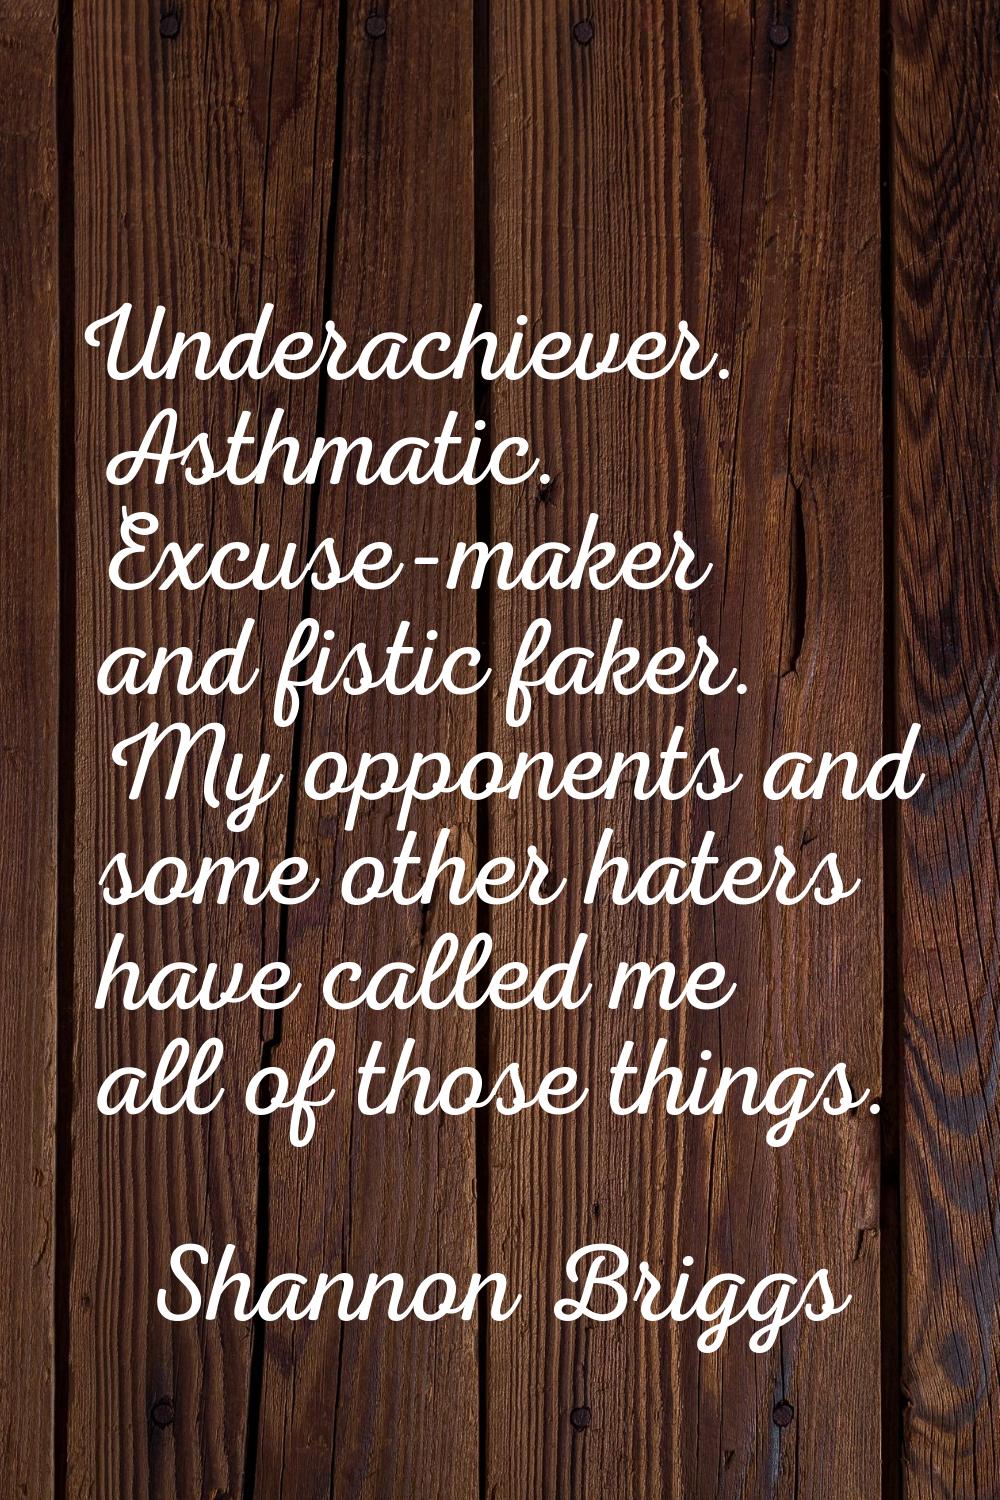 Underachiever. Asthmatic. Excuse-maker and fistic faker. My opponents and some other haters have ca